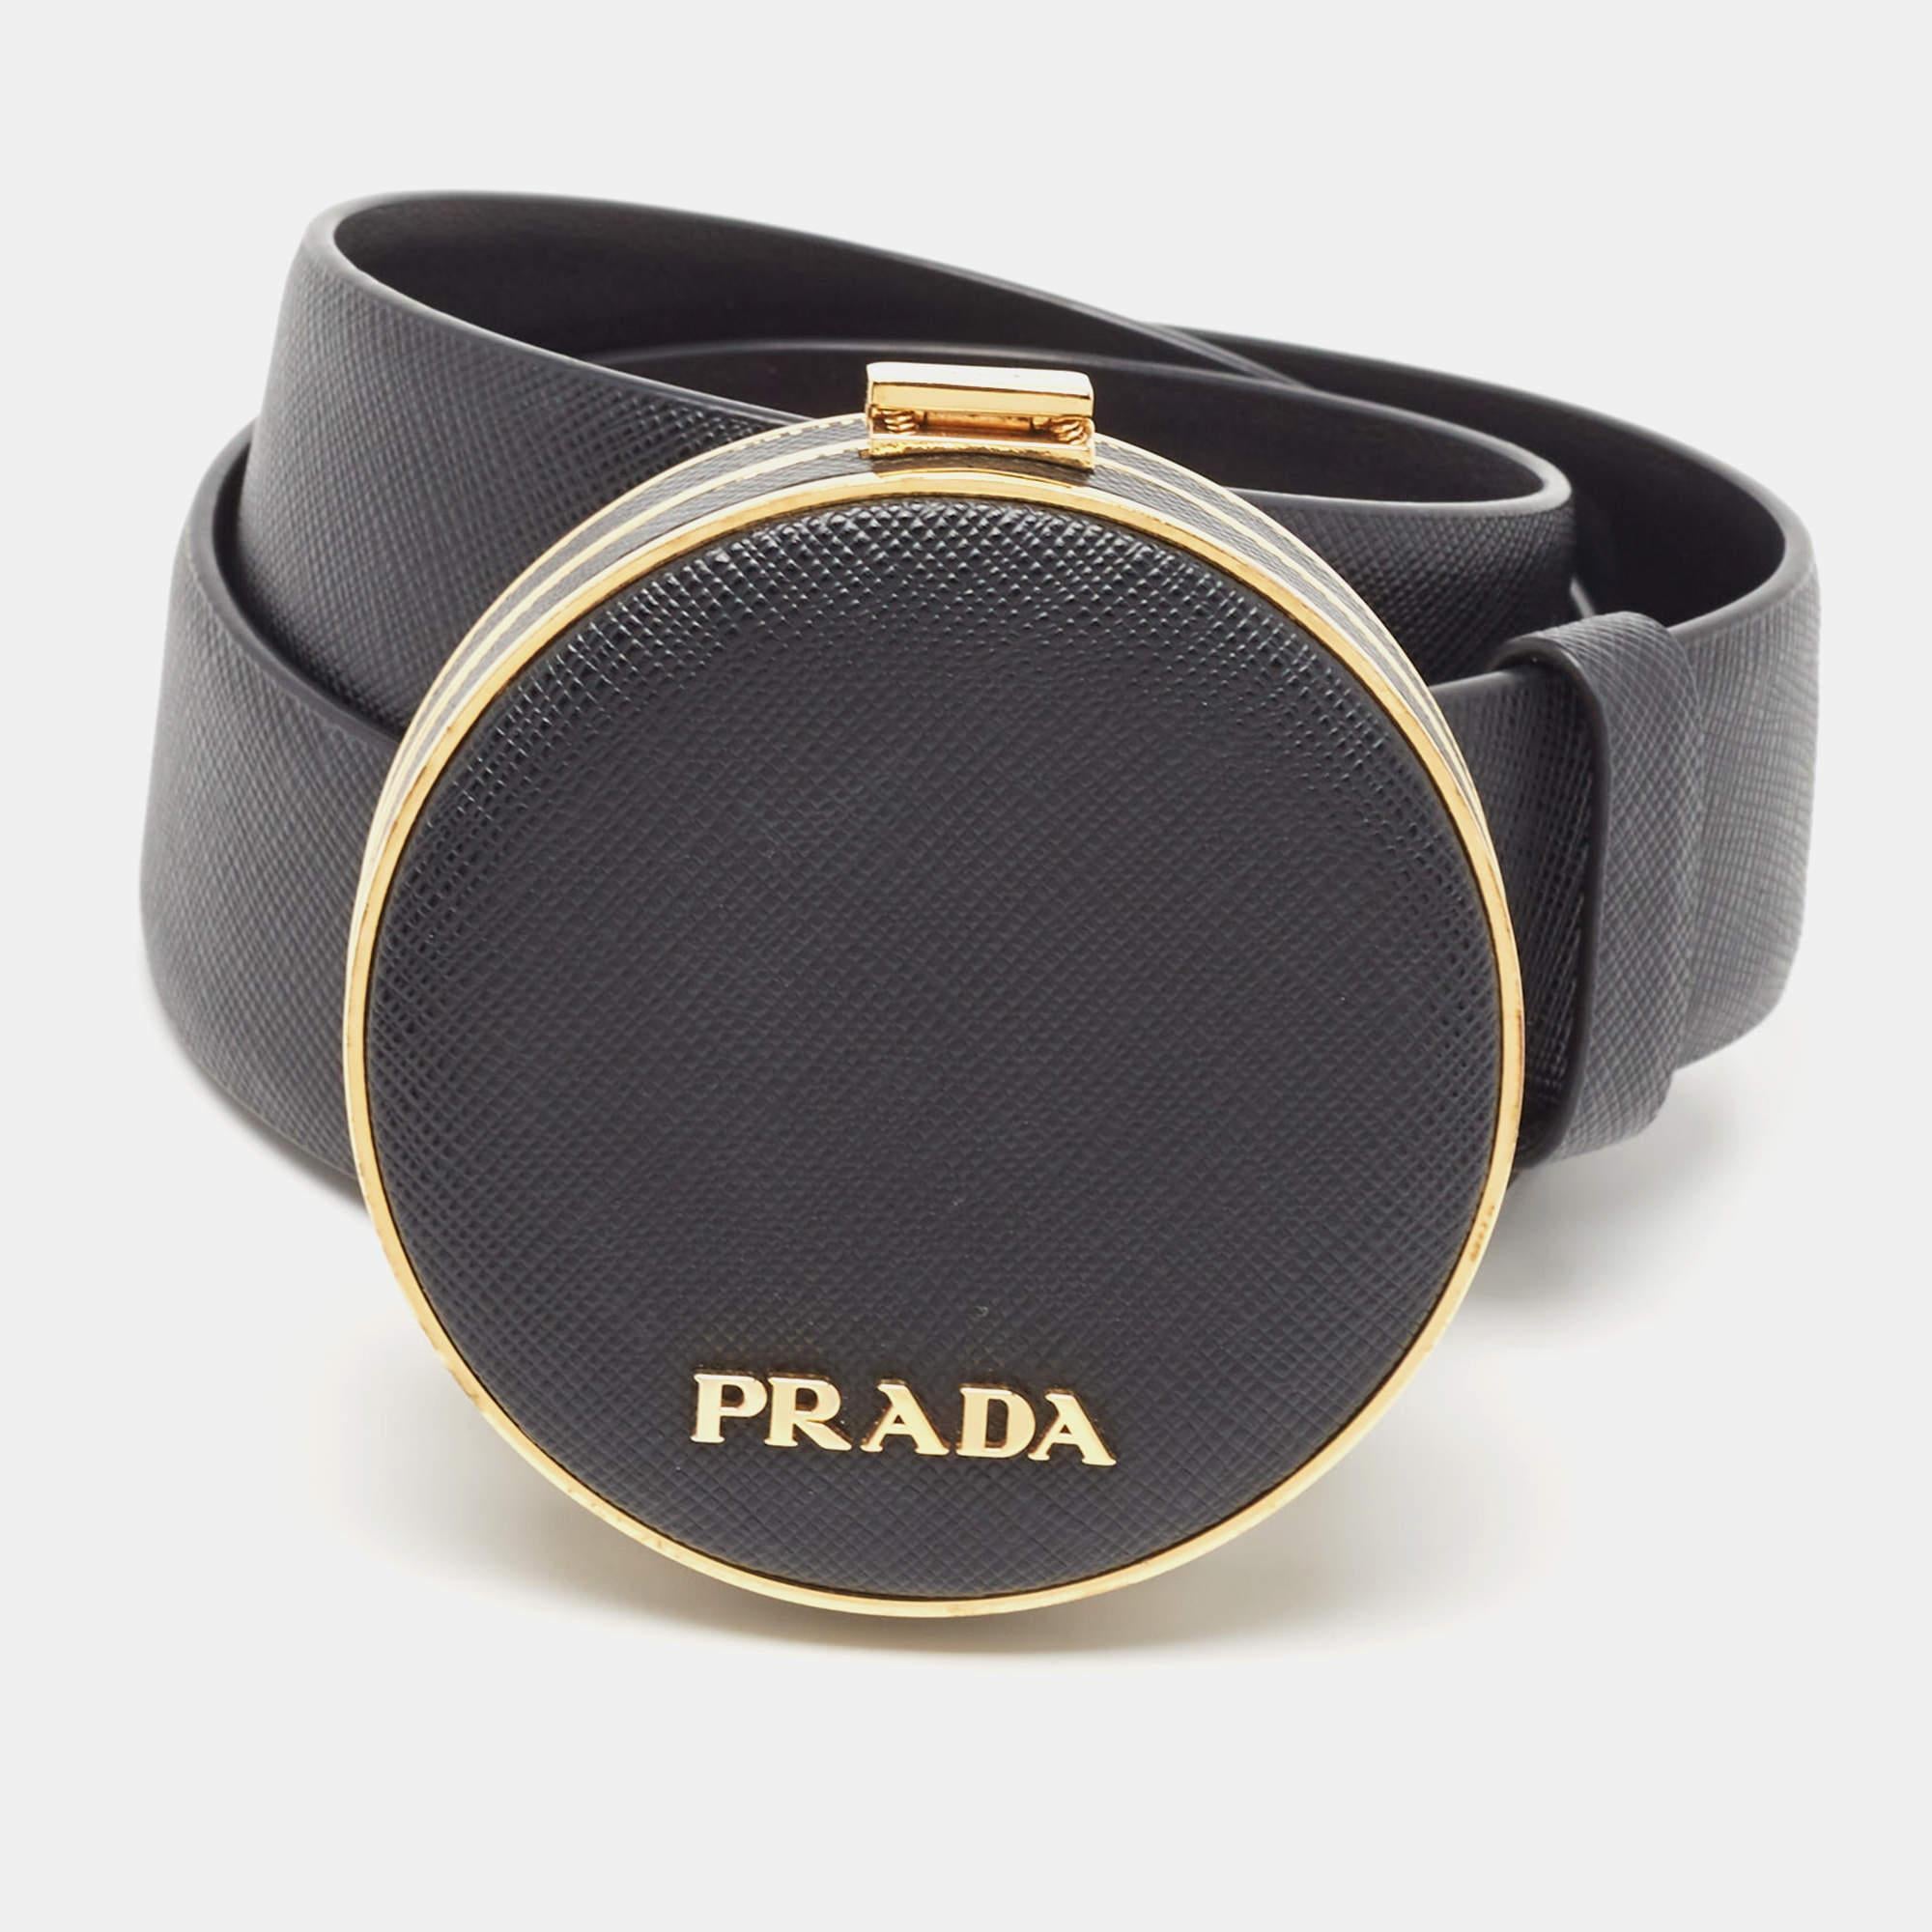 Elevate your style quotient with this Prada minaudière belt. Crafted to perfection, it exudes sophistication and luxury, making it the ultimate accessory for those who demand both quality and fashion.

Includes: Original Dustbag

